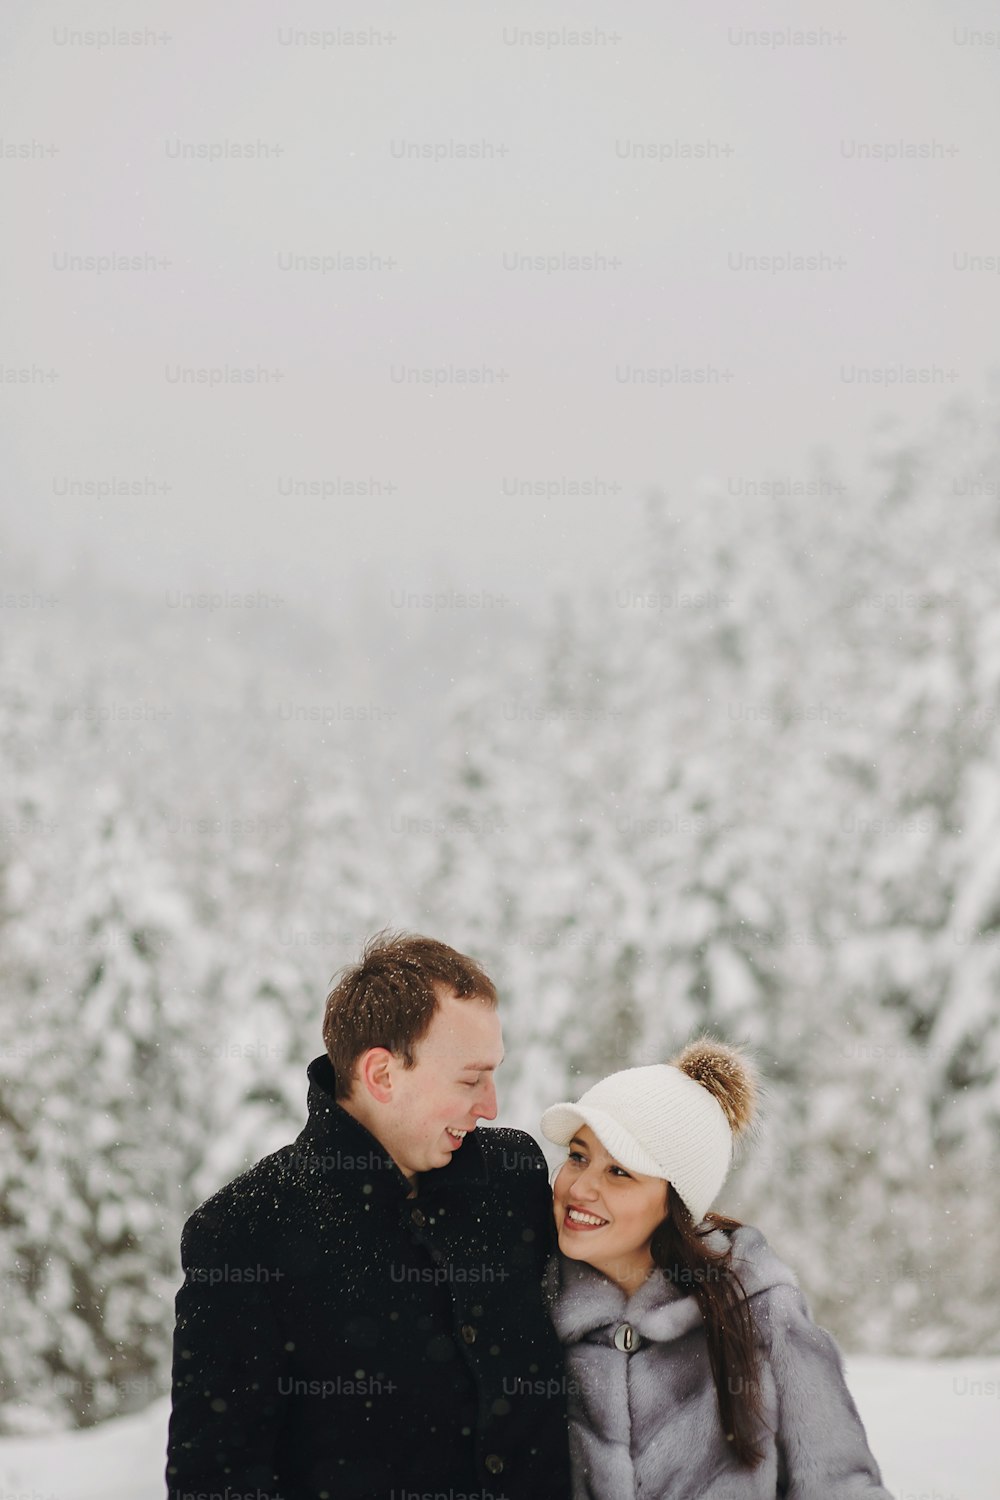 Stylish couple in love hugging in snowy mountains. Portraits of happy family gently embracing and smiling in winter mountains and forest. Holiday getaway together